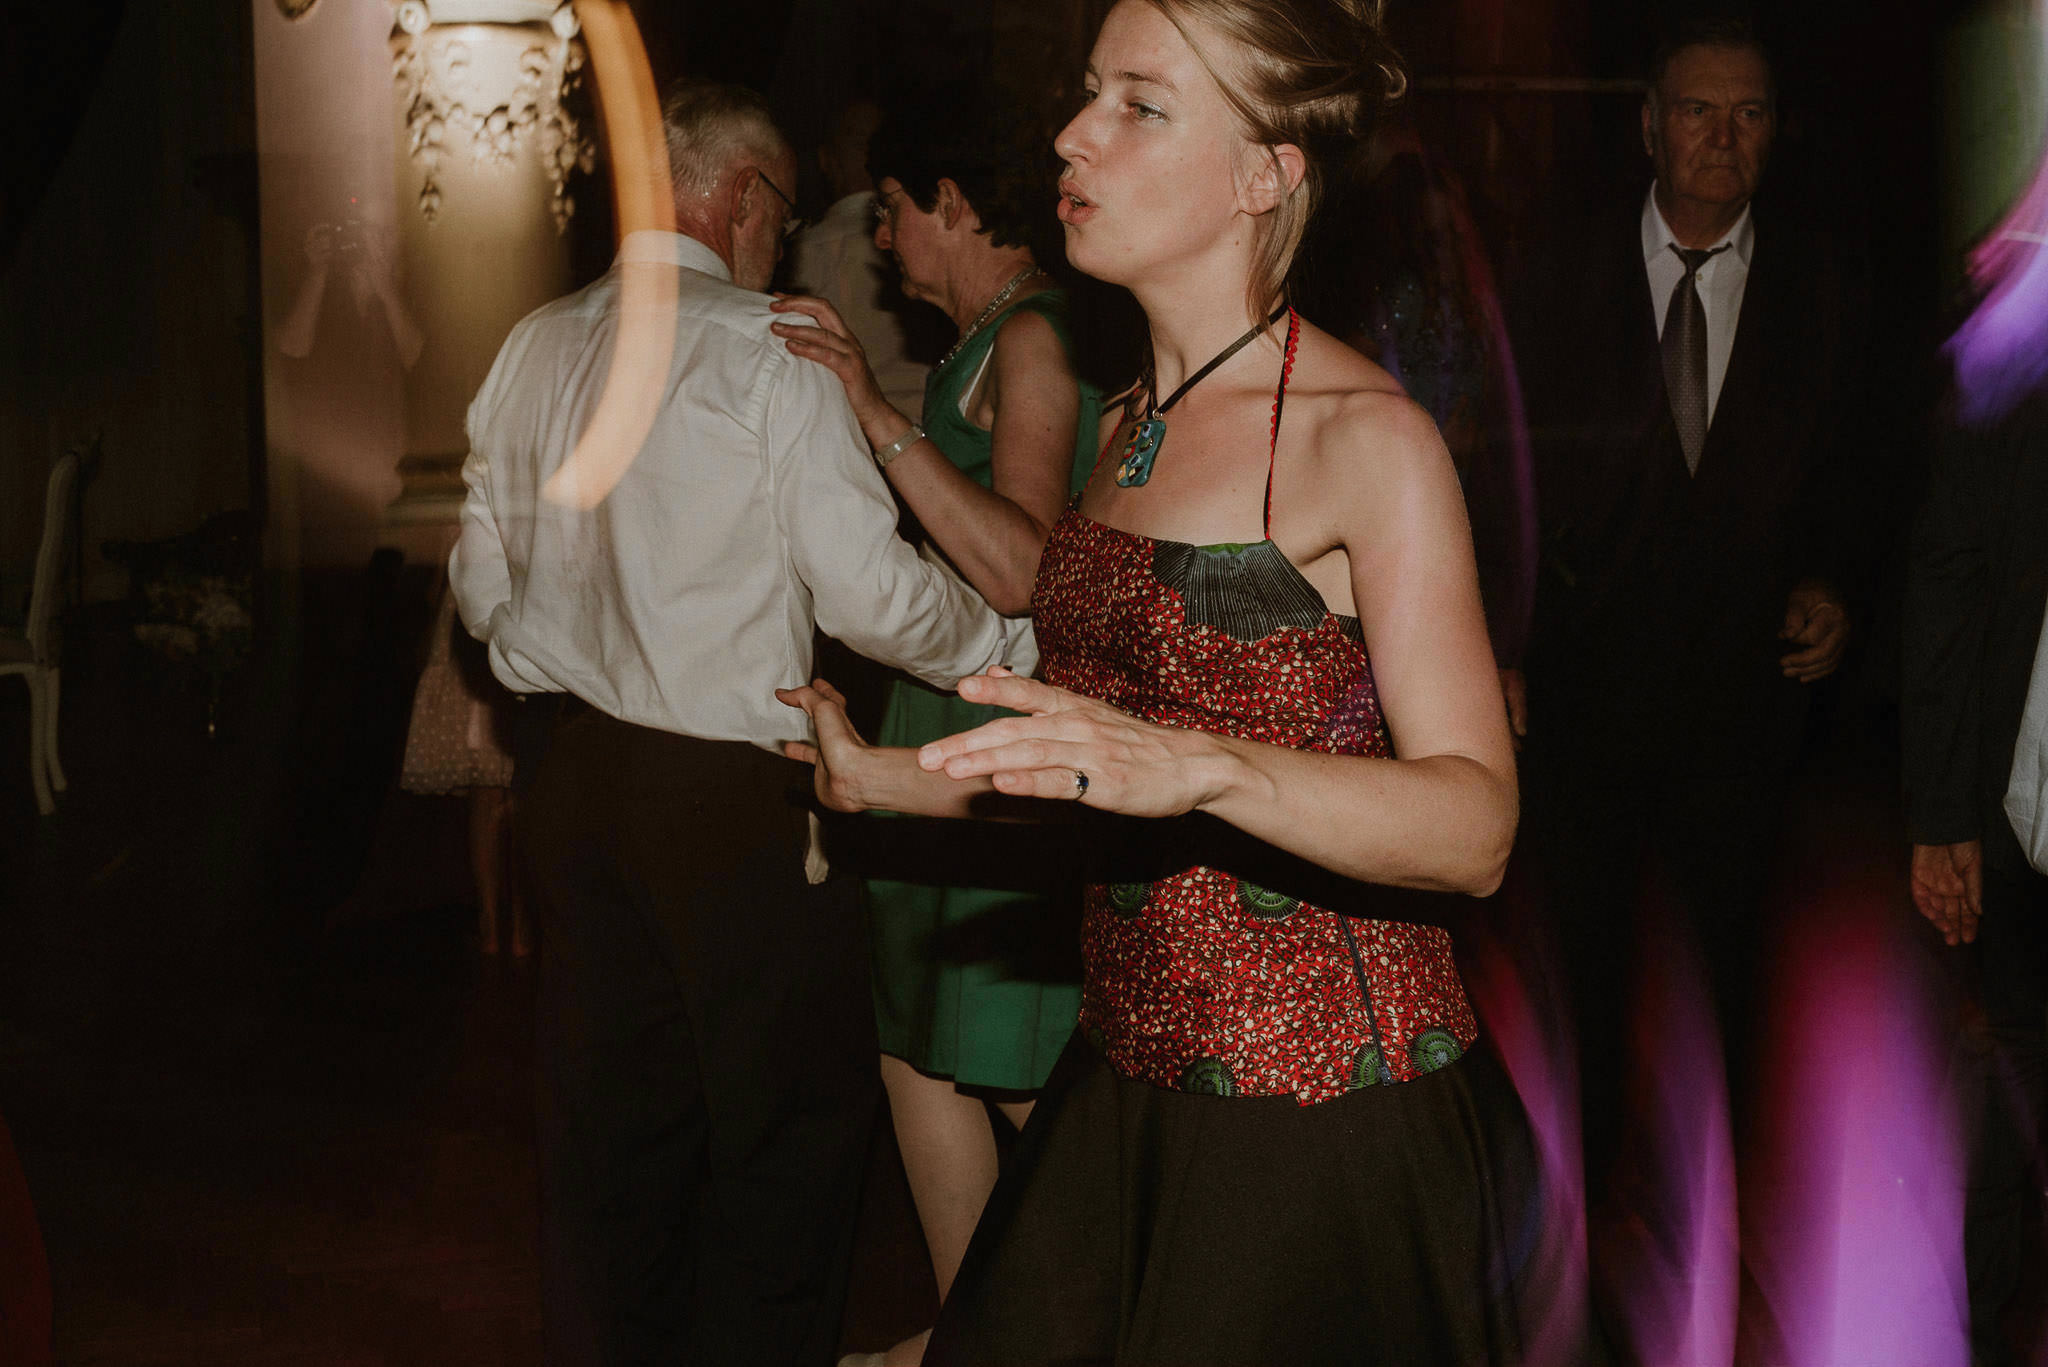 dancing during the wedding party